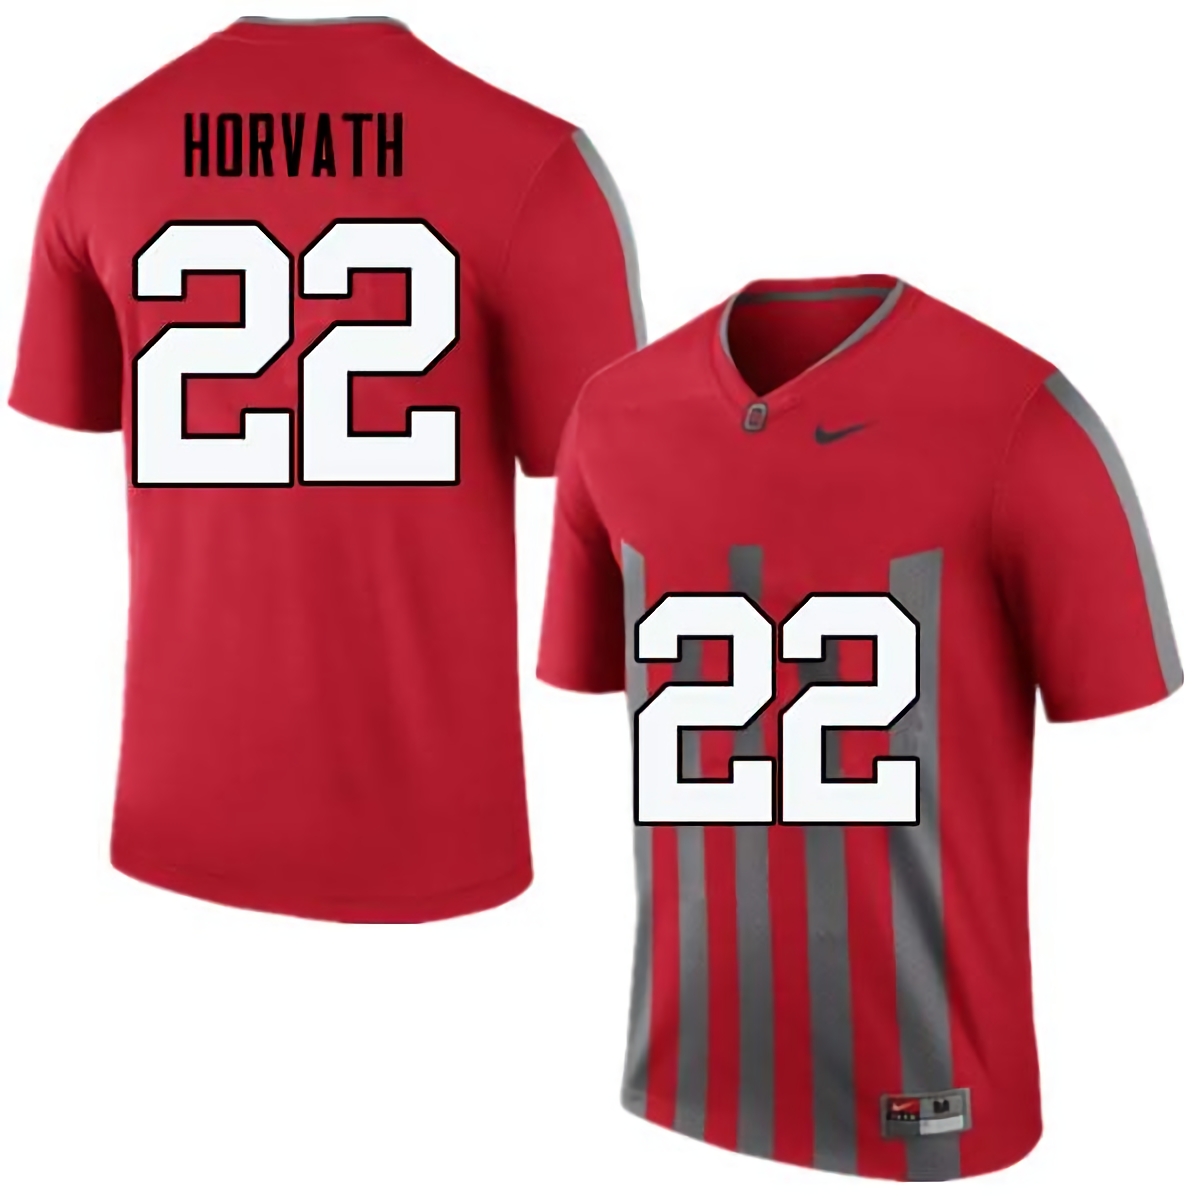 Les Horvath Ohio State Buckeyes Men's NCAA #22 Nike Throwback Red College Stitched Football Jersey QAH1556VO